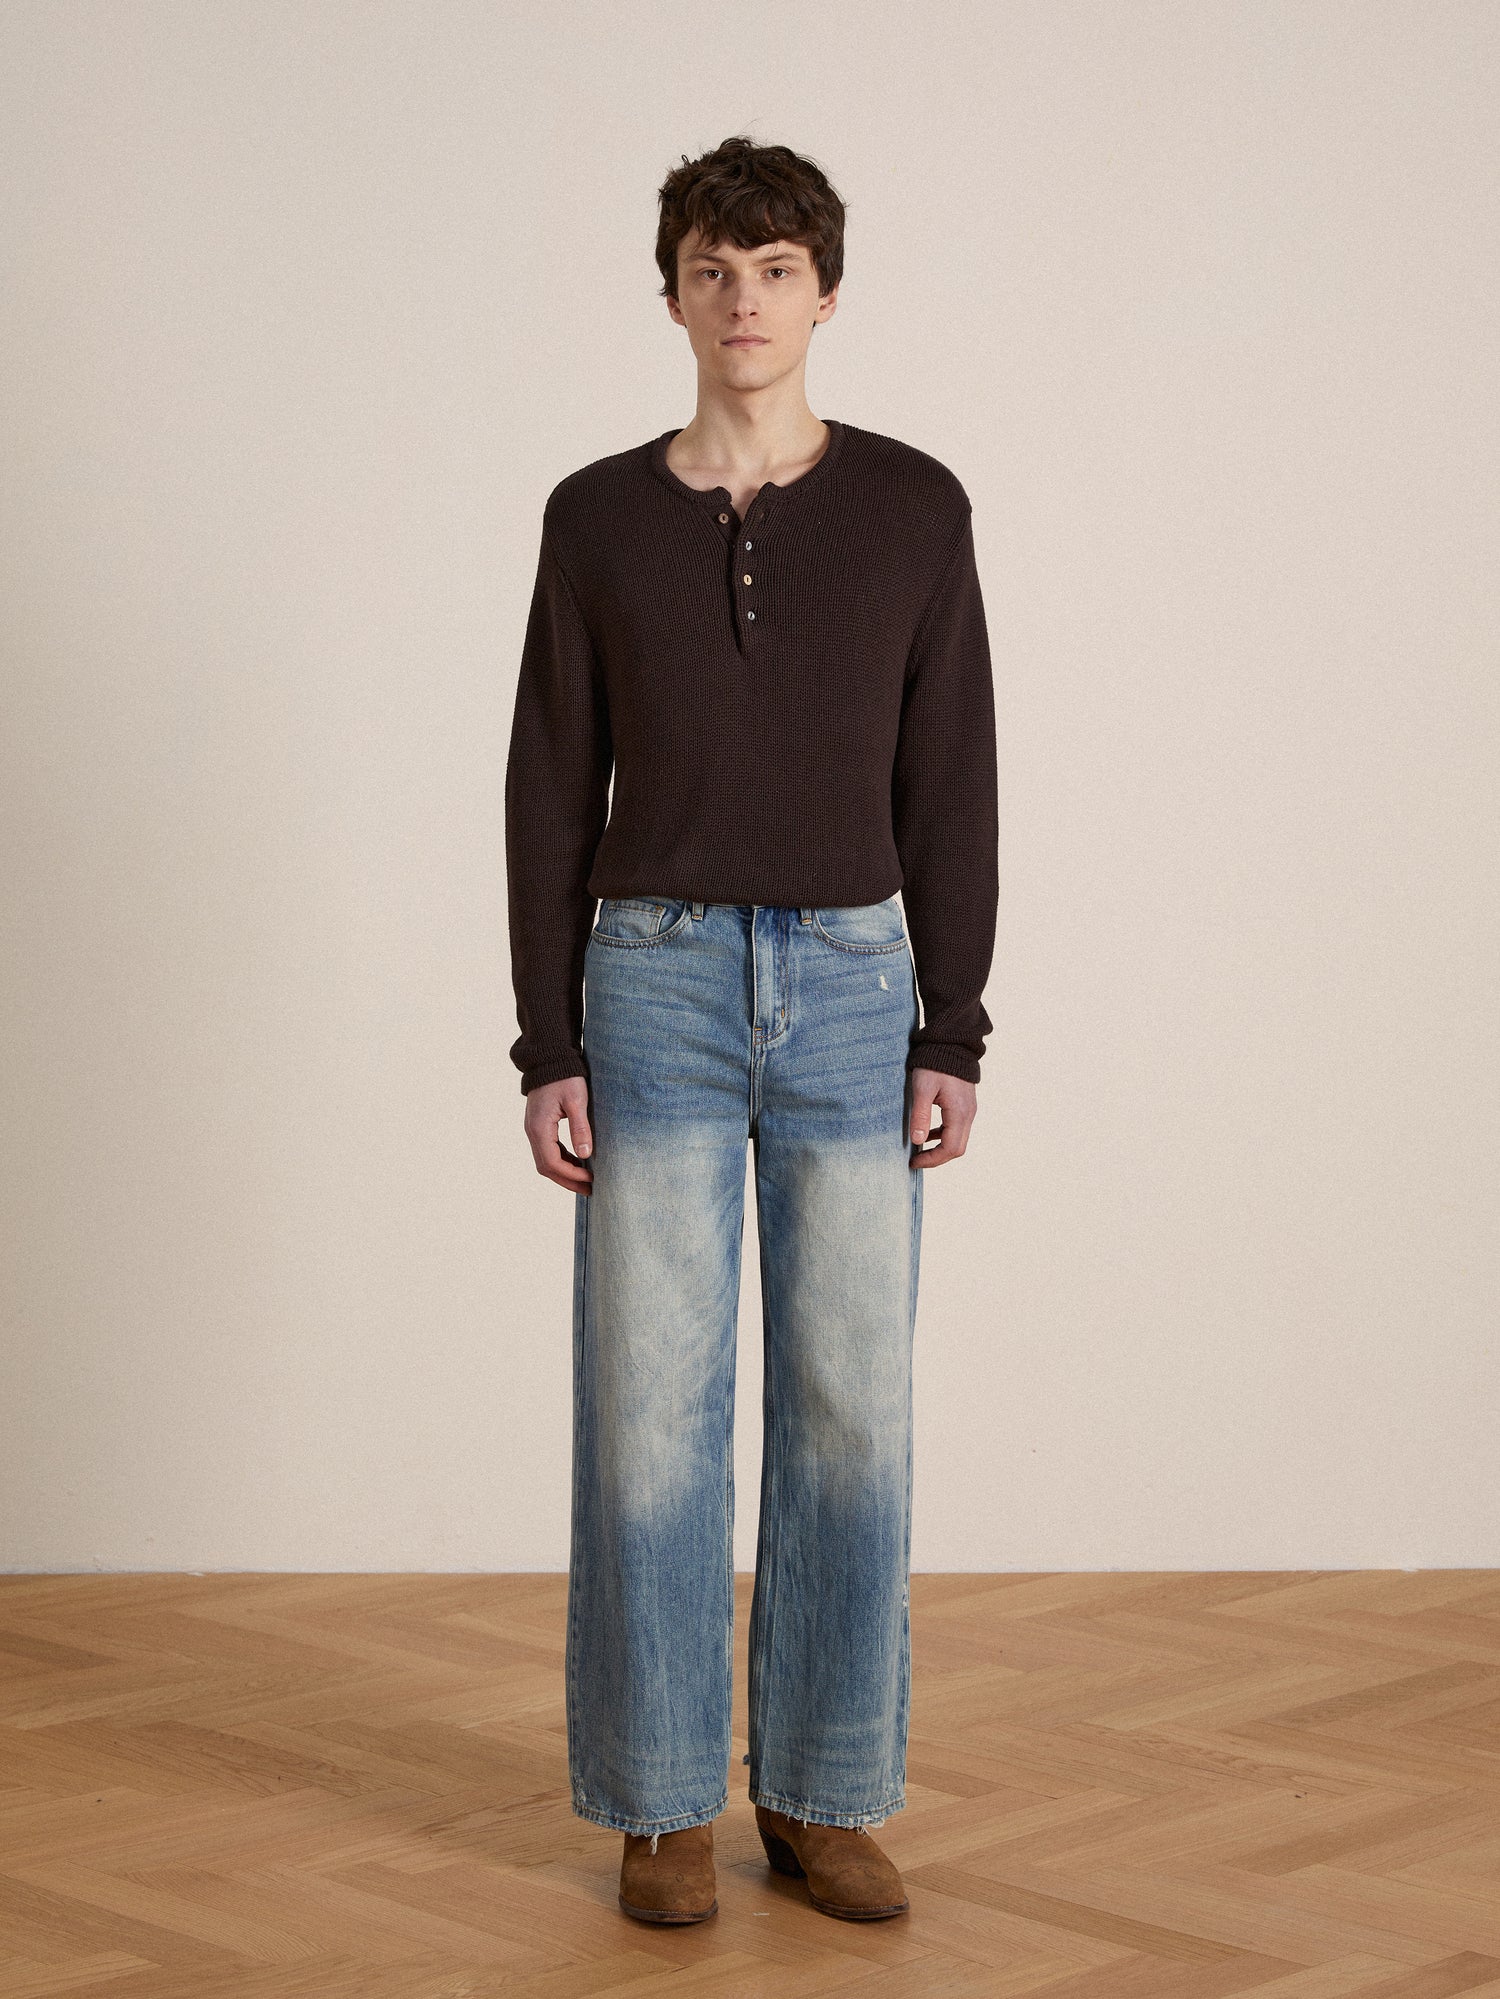 A man wearing jeans and a Profound Knit Henley sweater standing on a wooden floor.